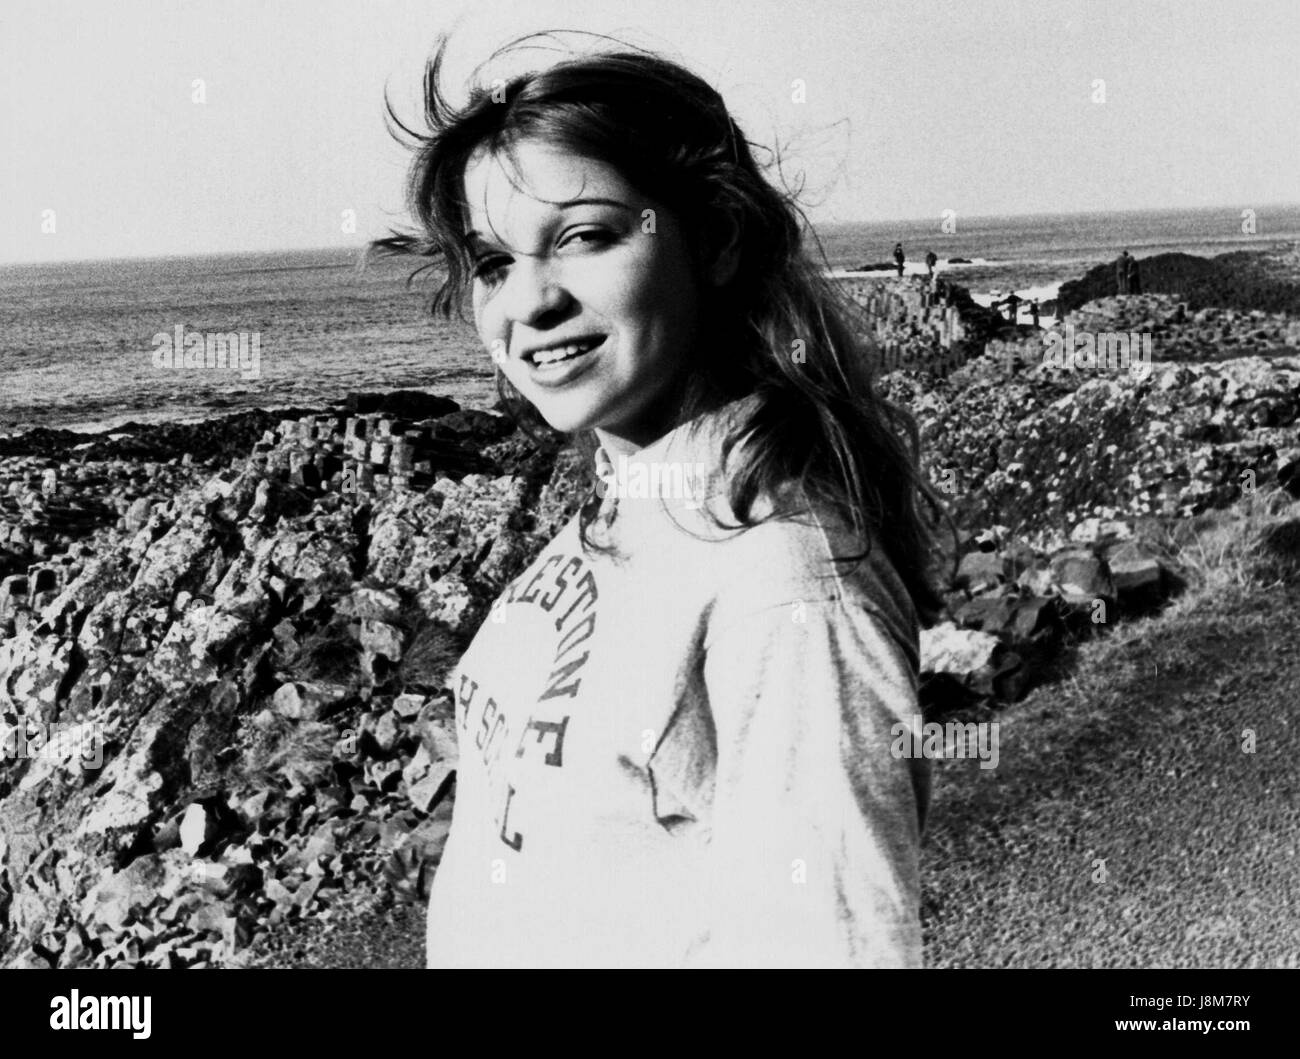 Rachel Sweet, U.S. pop singer, poses by the coast in Northern Ireland on October 29, 1978. She was part of the Be Stiff tour run by her label Stiff Records. Stock Photo